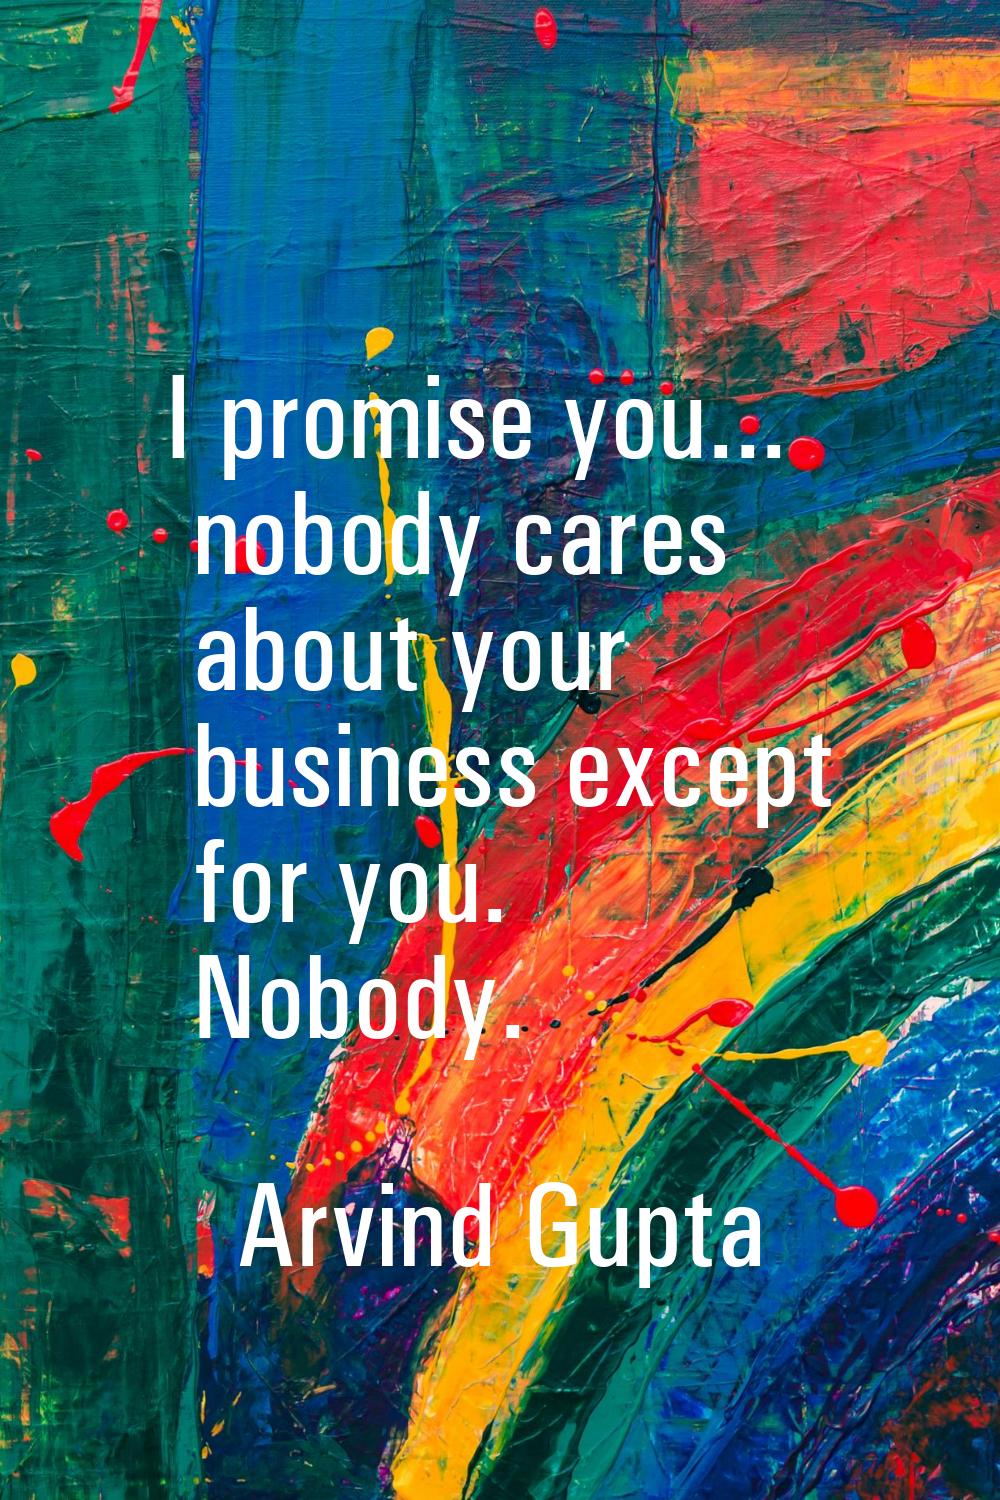 I promise you... nobody cares about your business except for you. Nobody.